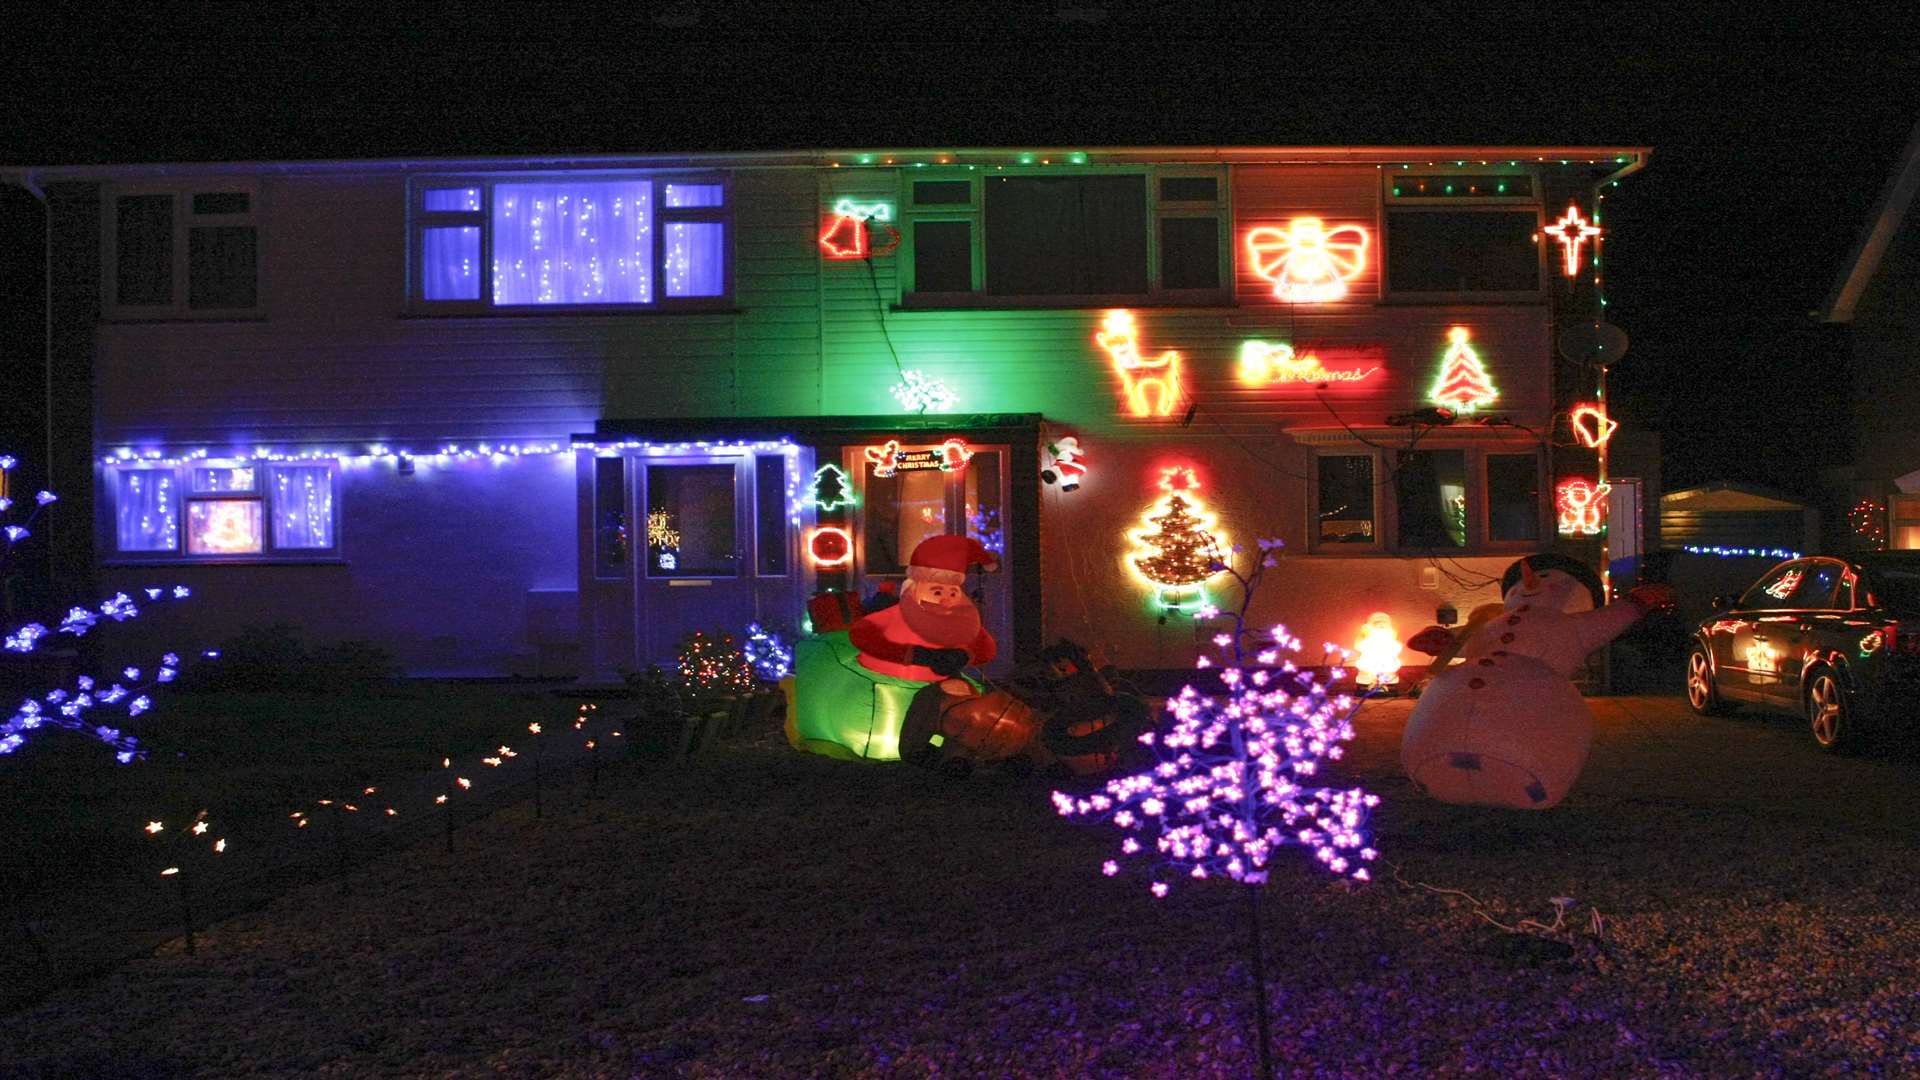 26 houses in Kennedy Drive made the effort this Christmas